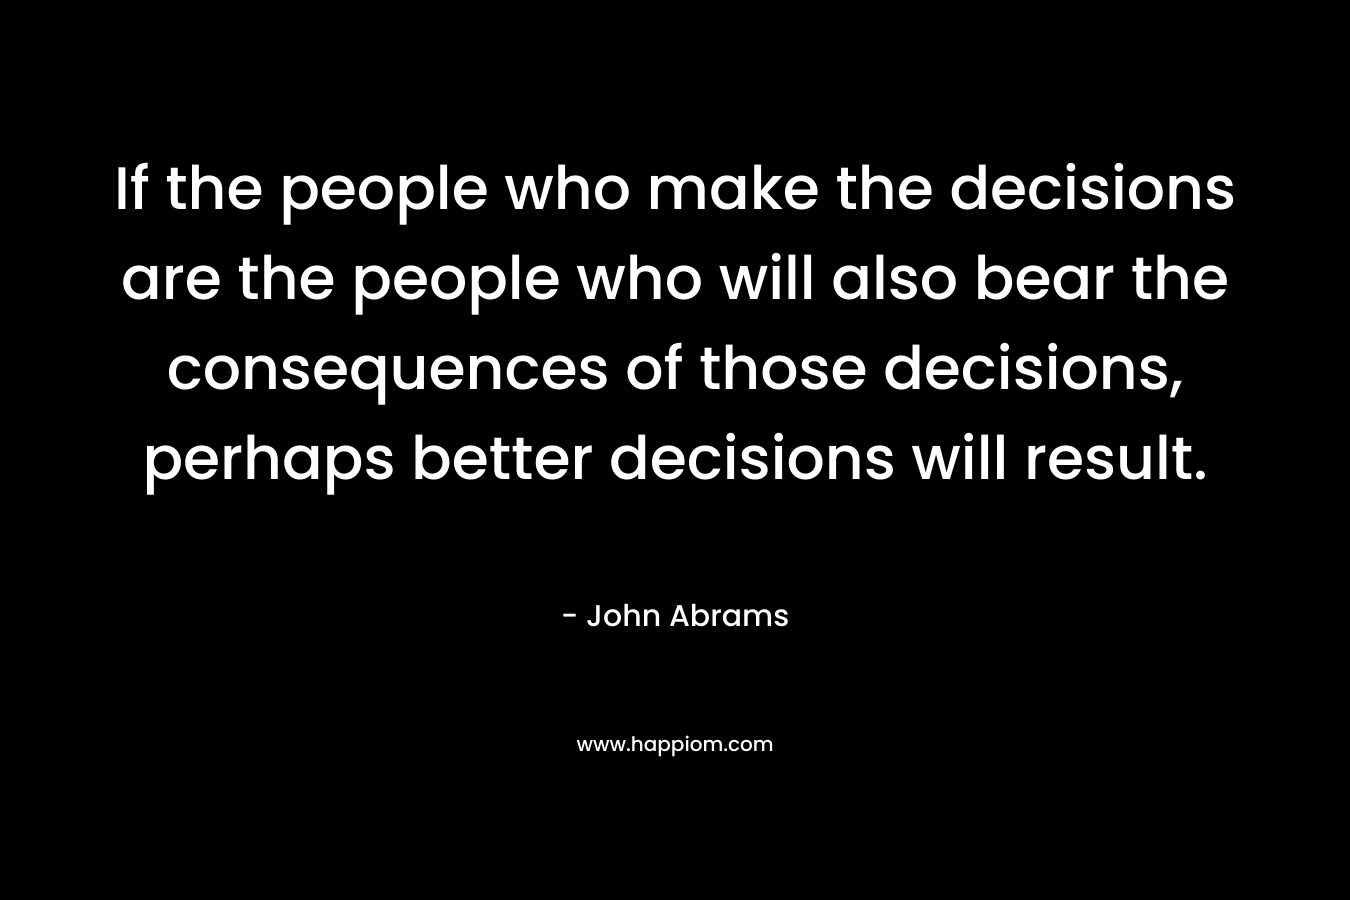 If the people who make the decisions are the people who will also bear the consequences of those decisions, perhaps better decisions will result.